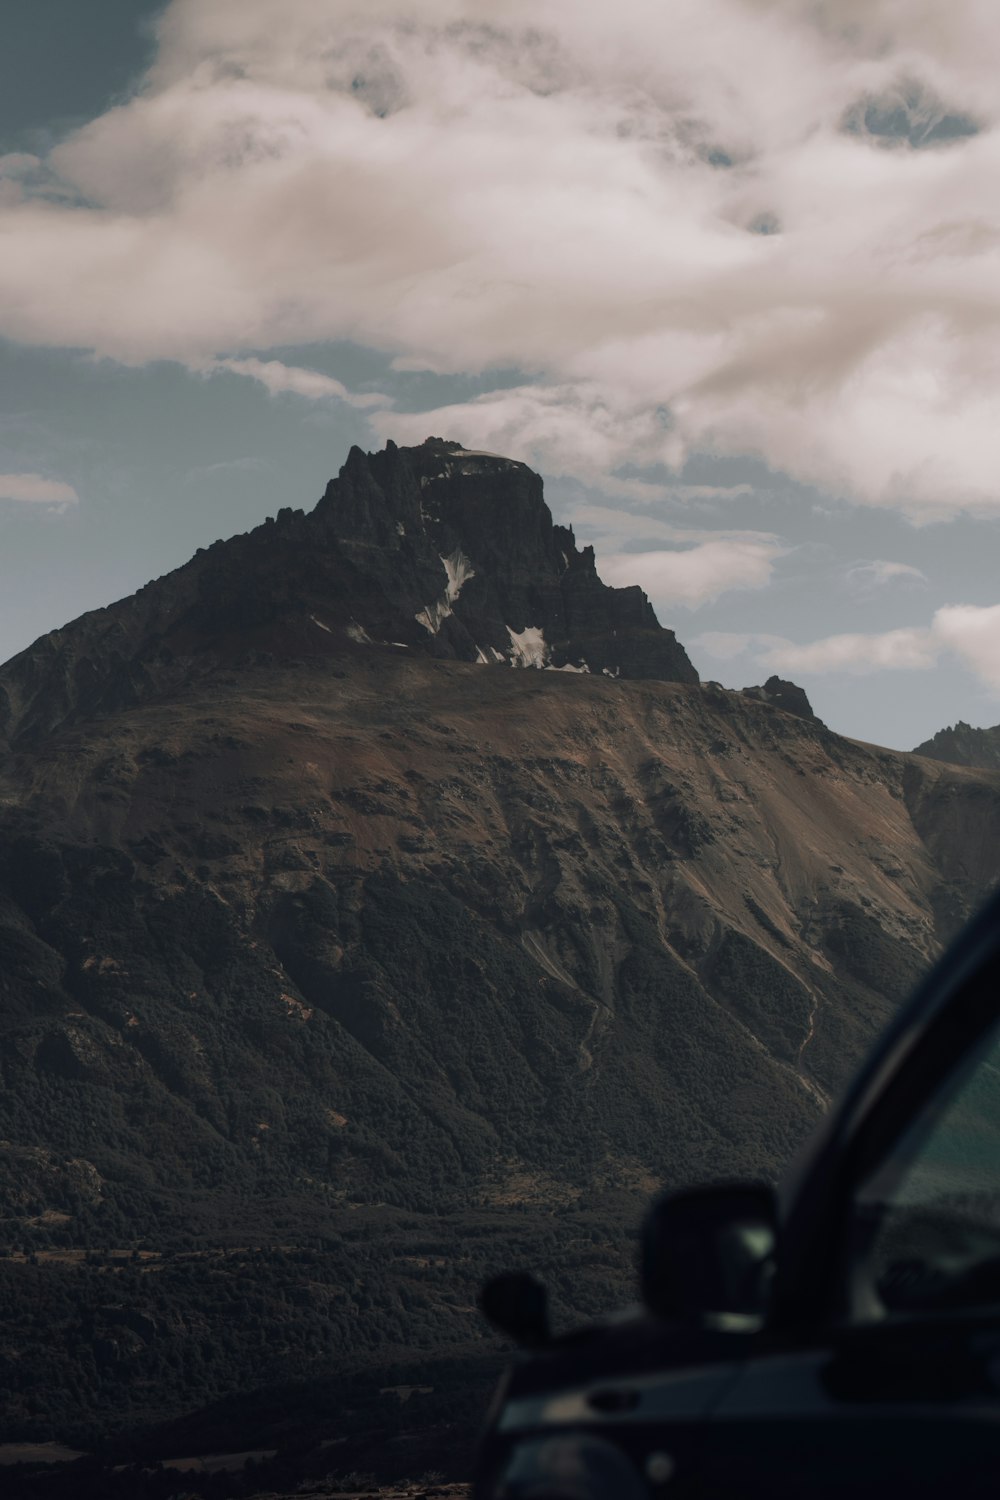 a car is parked in front of a mountain